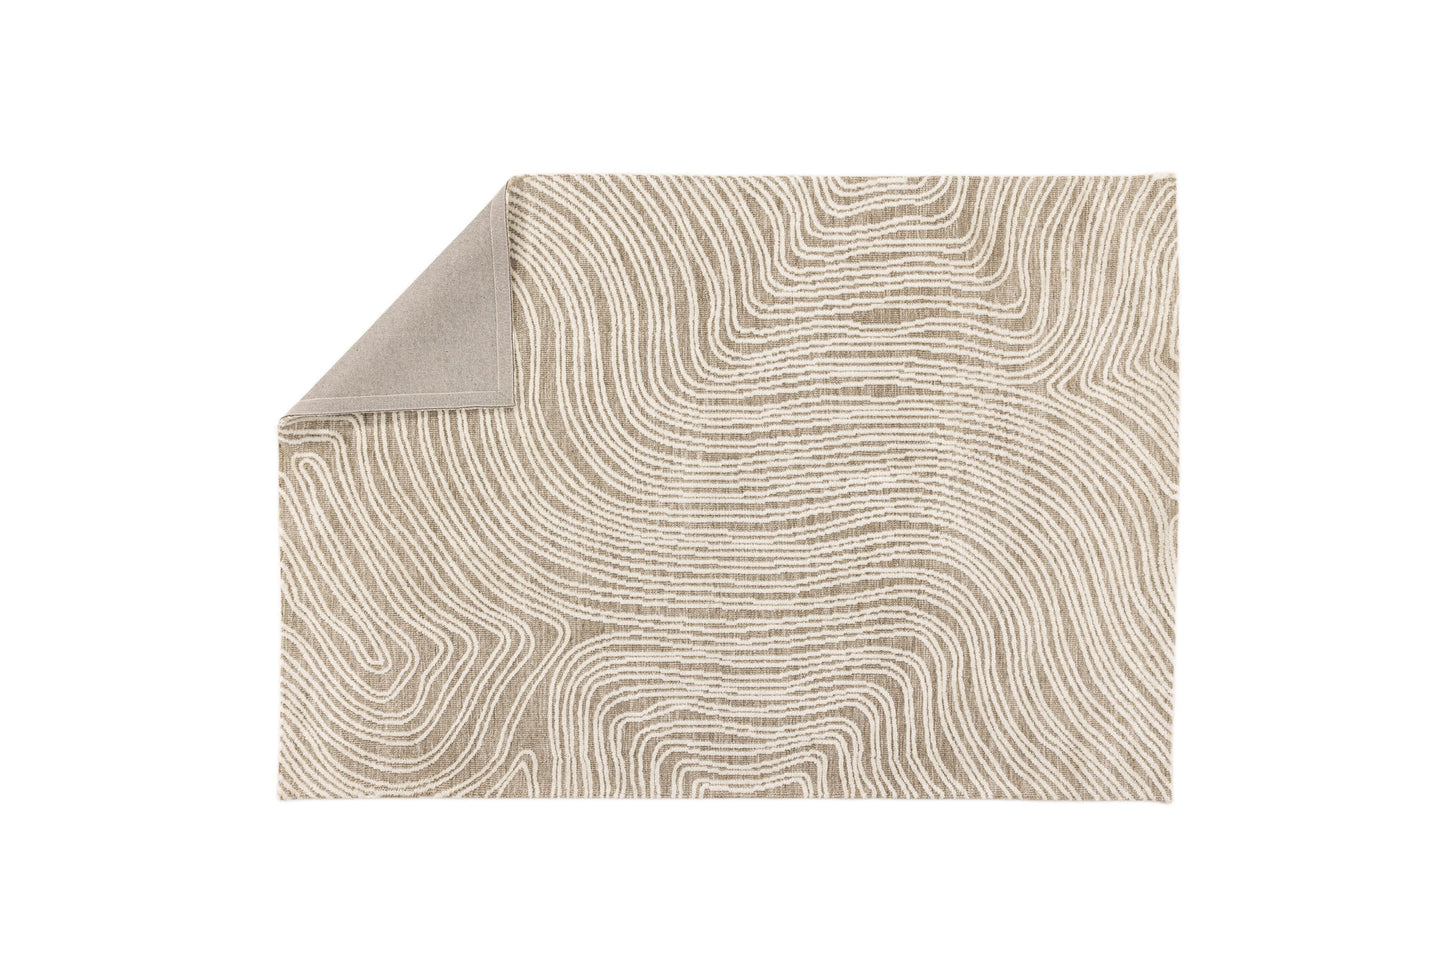 Melle Micropolyester - 395*295- -Rectangular -Ivory Beige